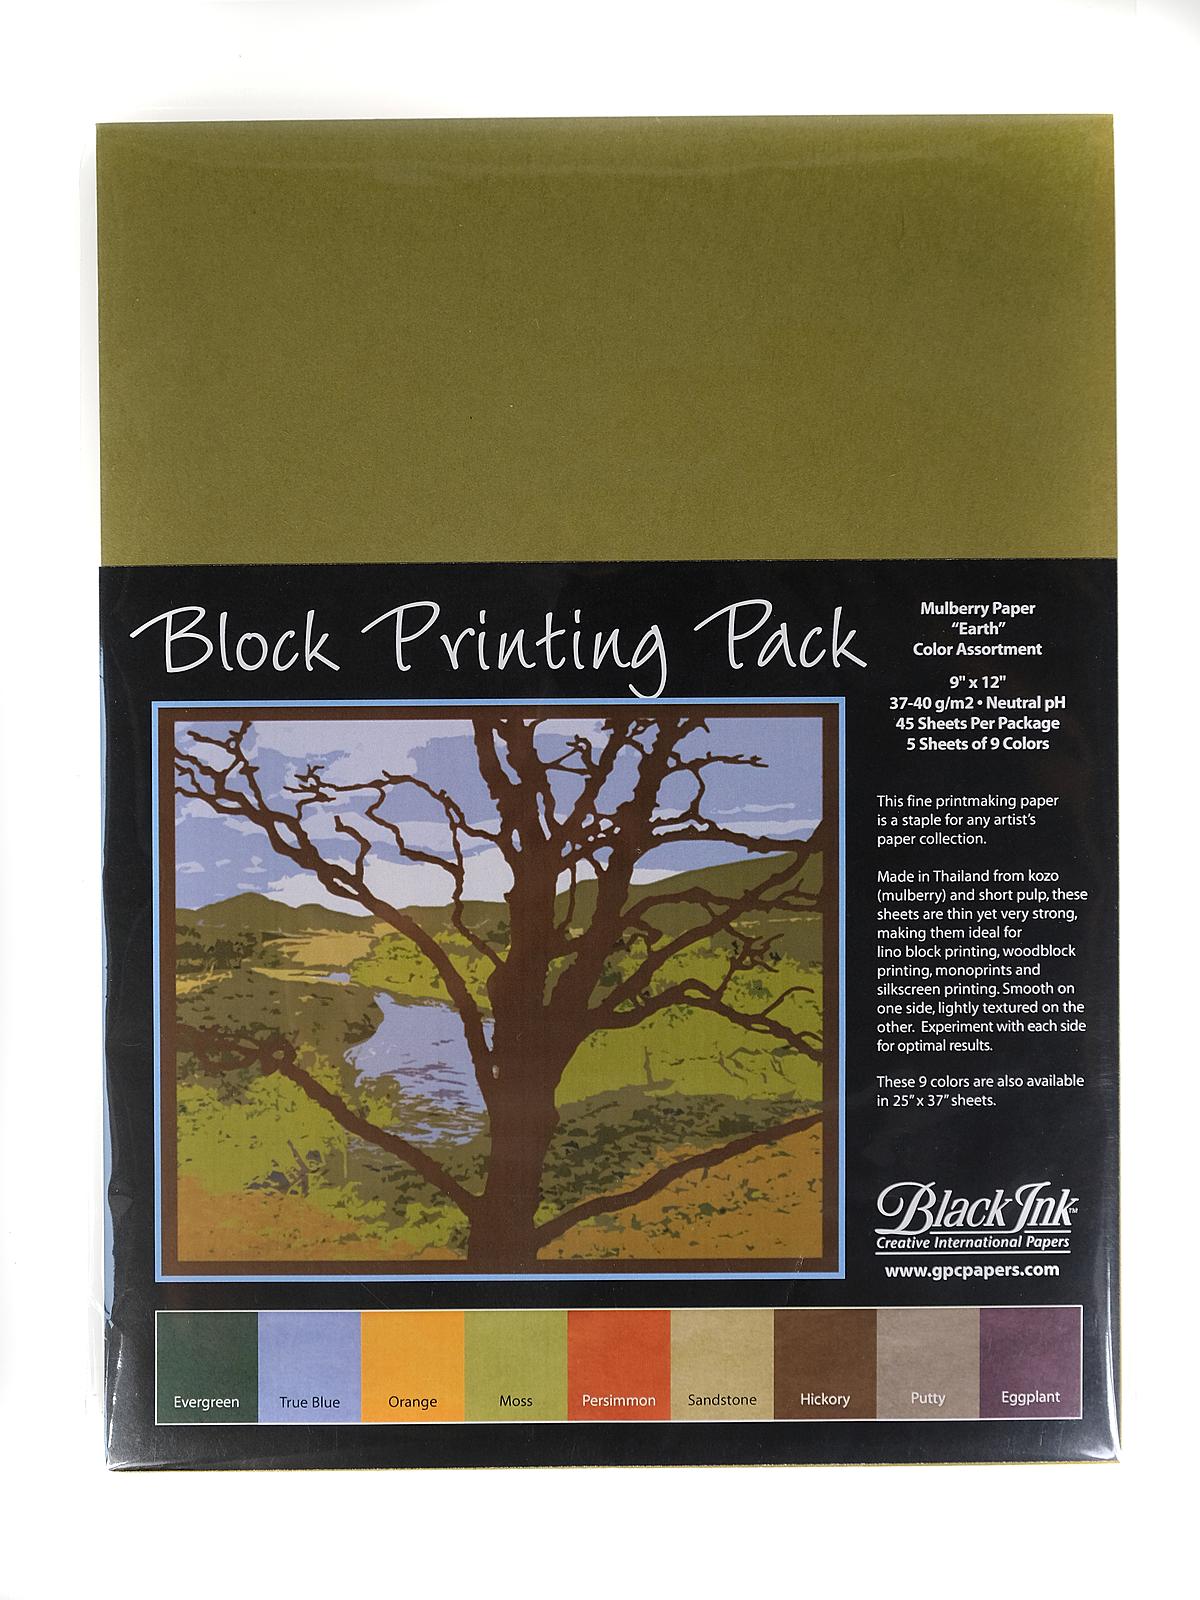 Thai Mulberry Block Printing Paper Packs Assorted Earth Tone Colors 9 In. X 12 In. 45 Sheets